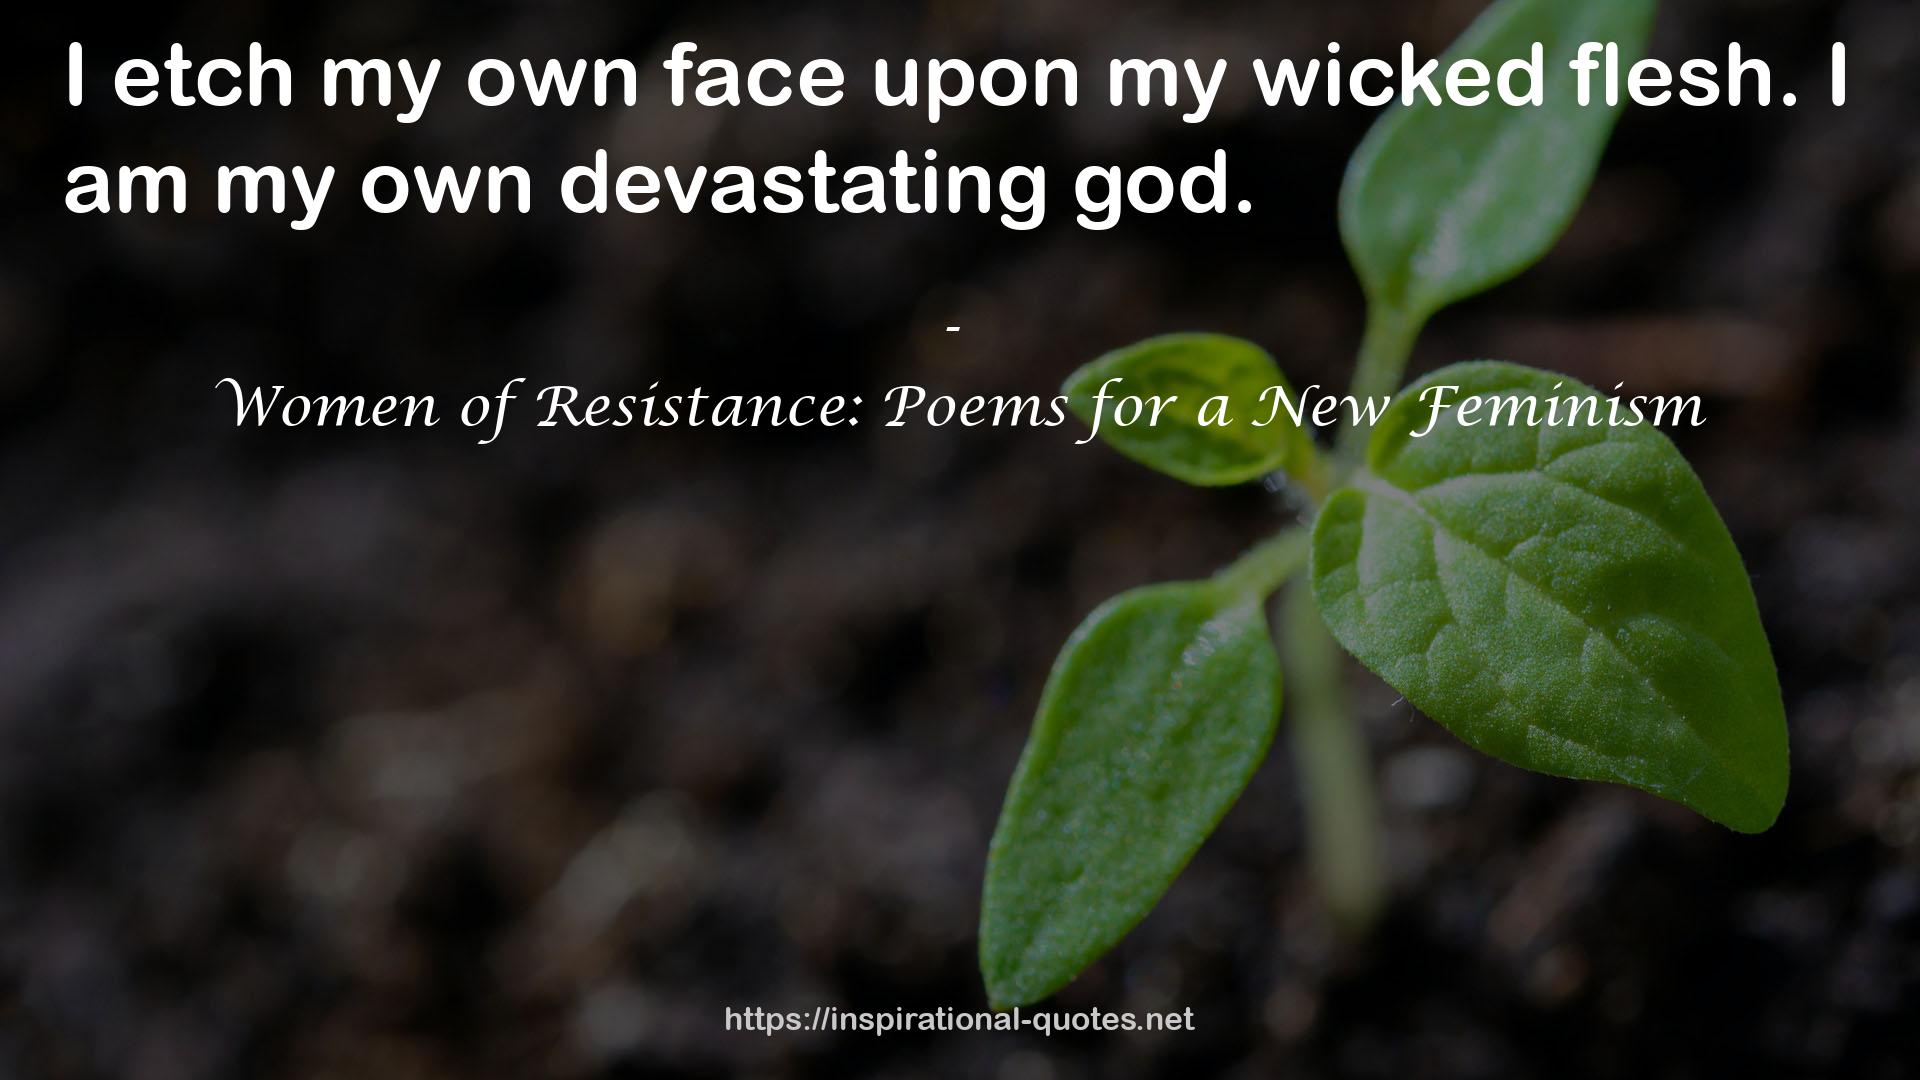 Women of Resistance: Poems for a New Feminism QUOTES